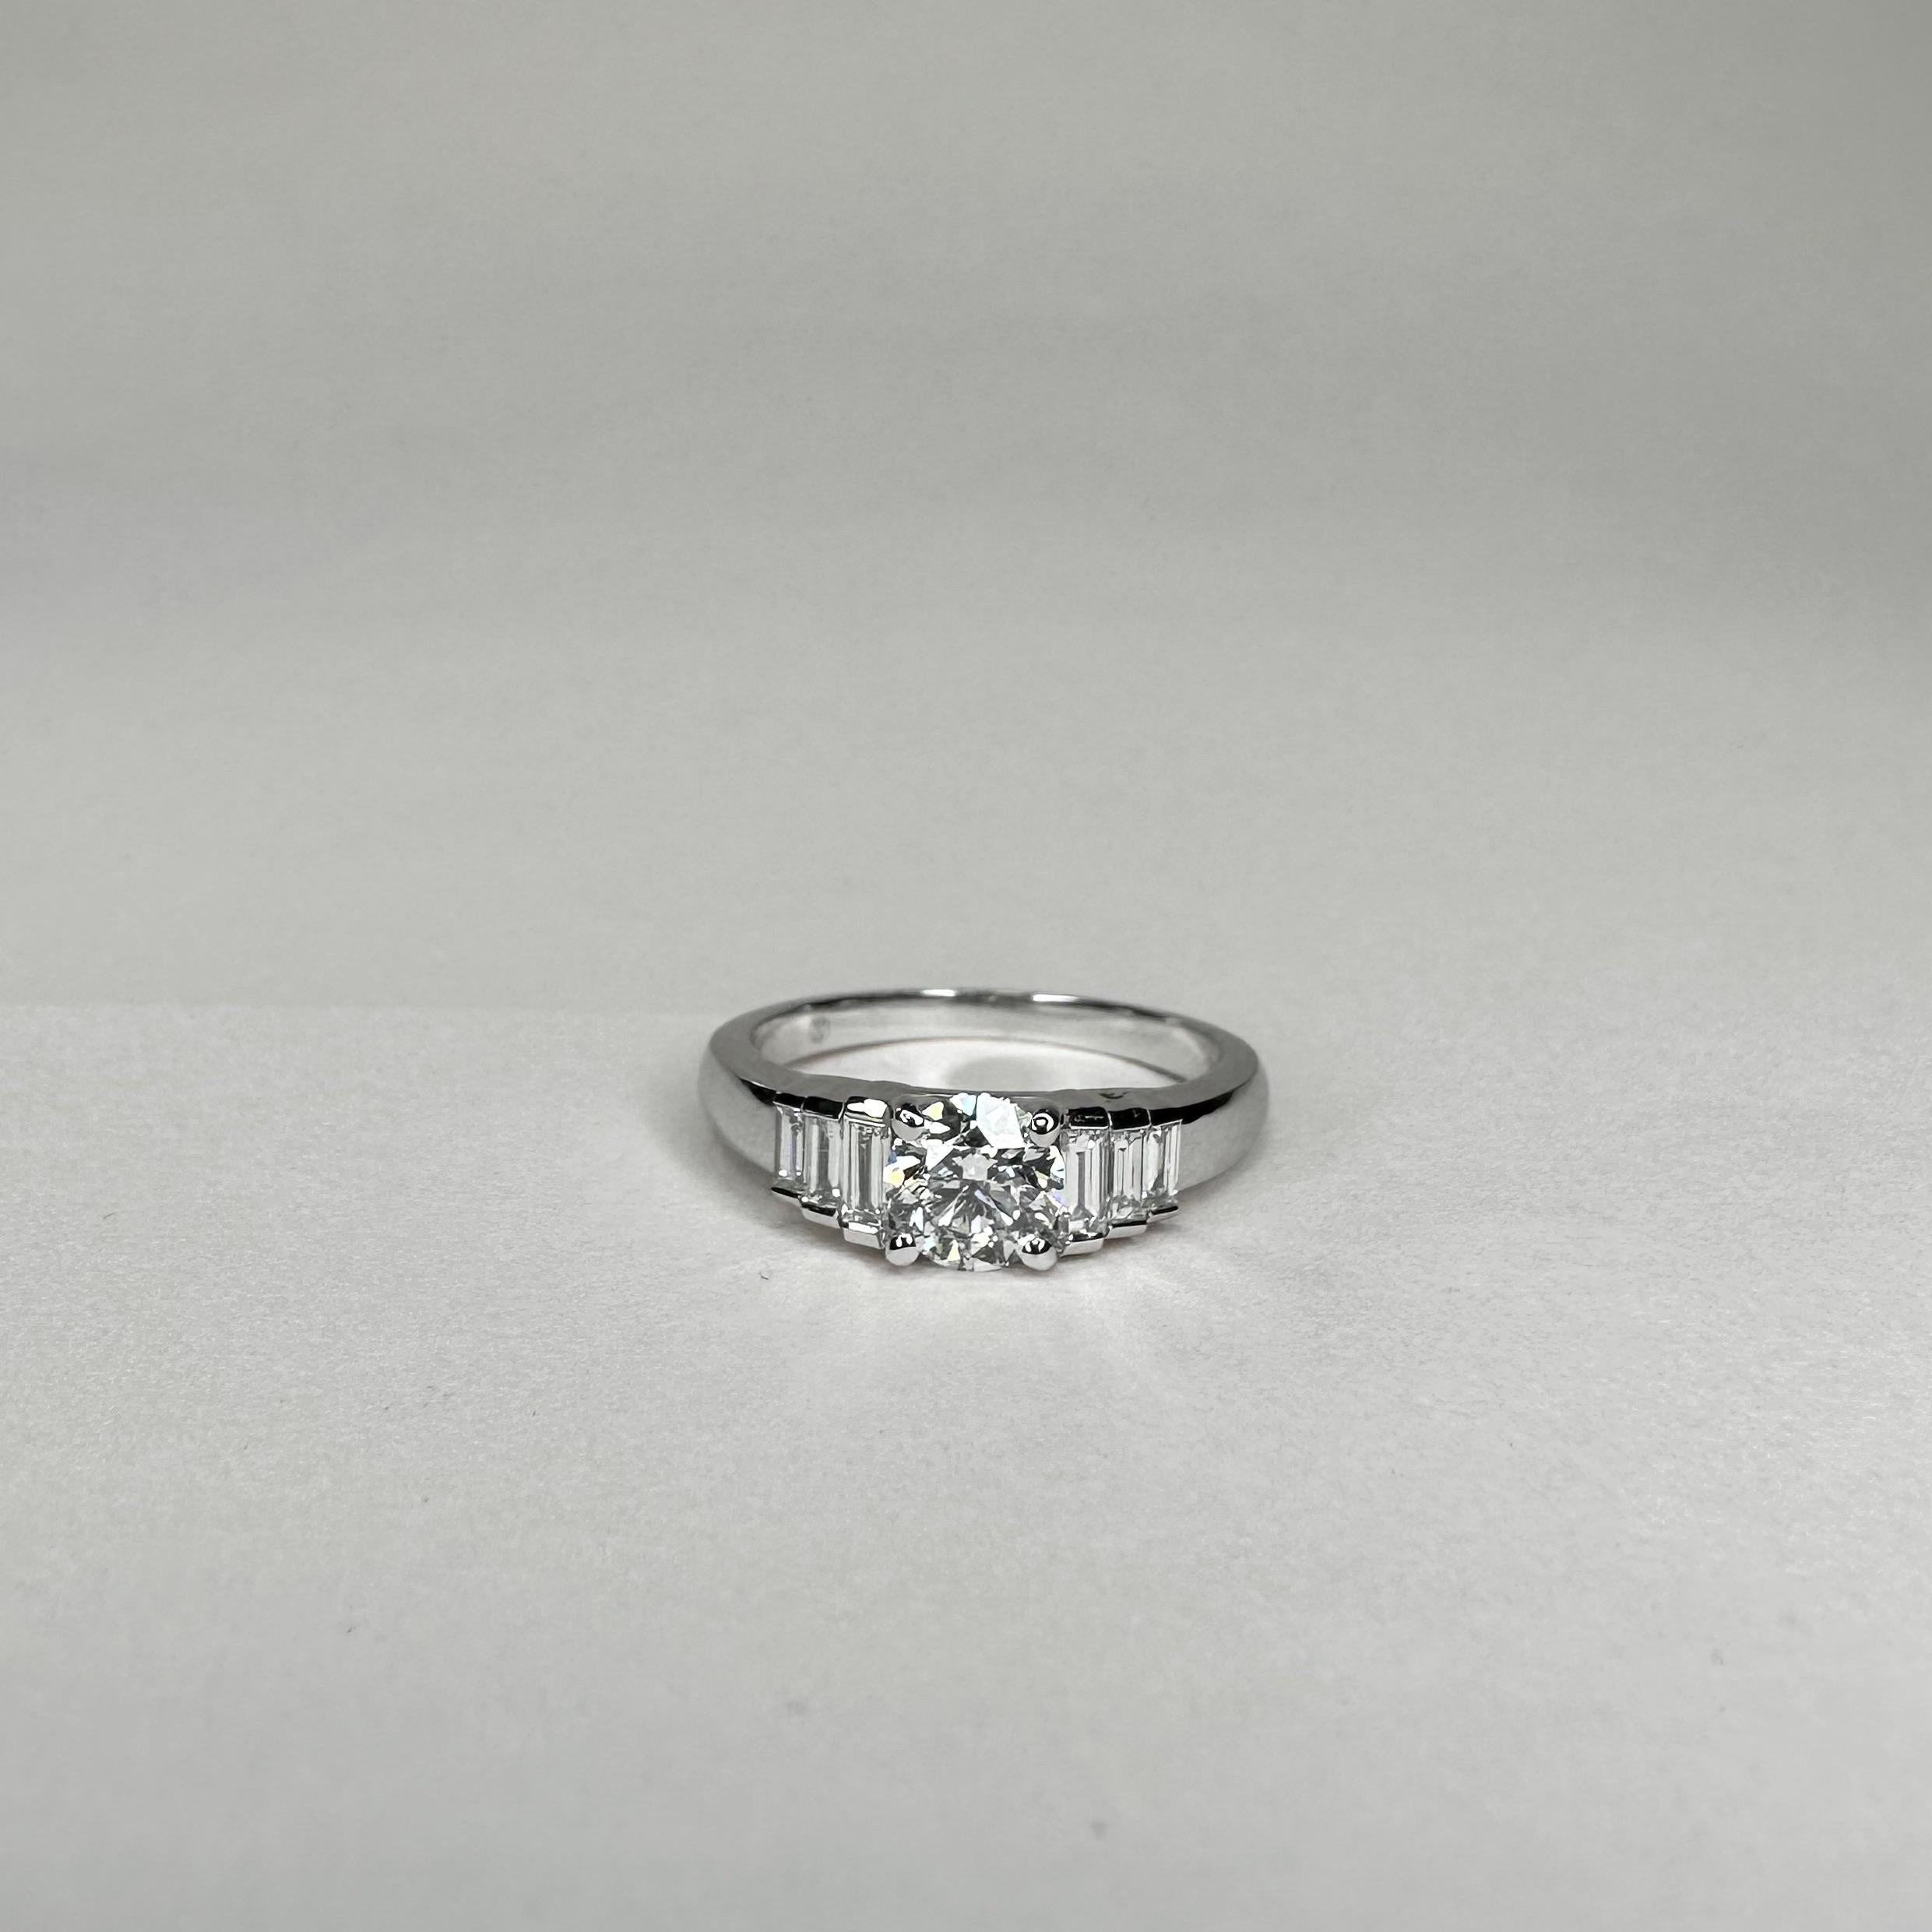 For Sale:  Art Deco Style 18k White Gold 0.70 Ct Diamond Ring with Baguette Diamonds 4